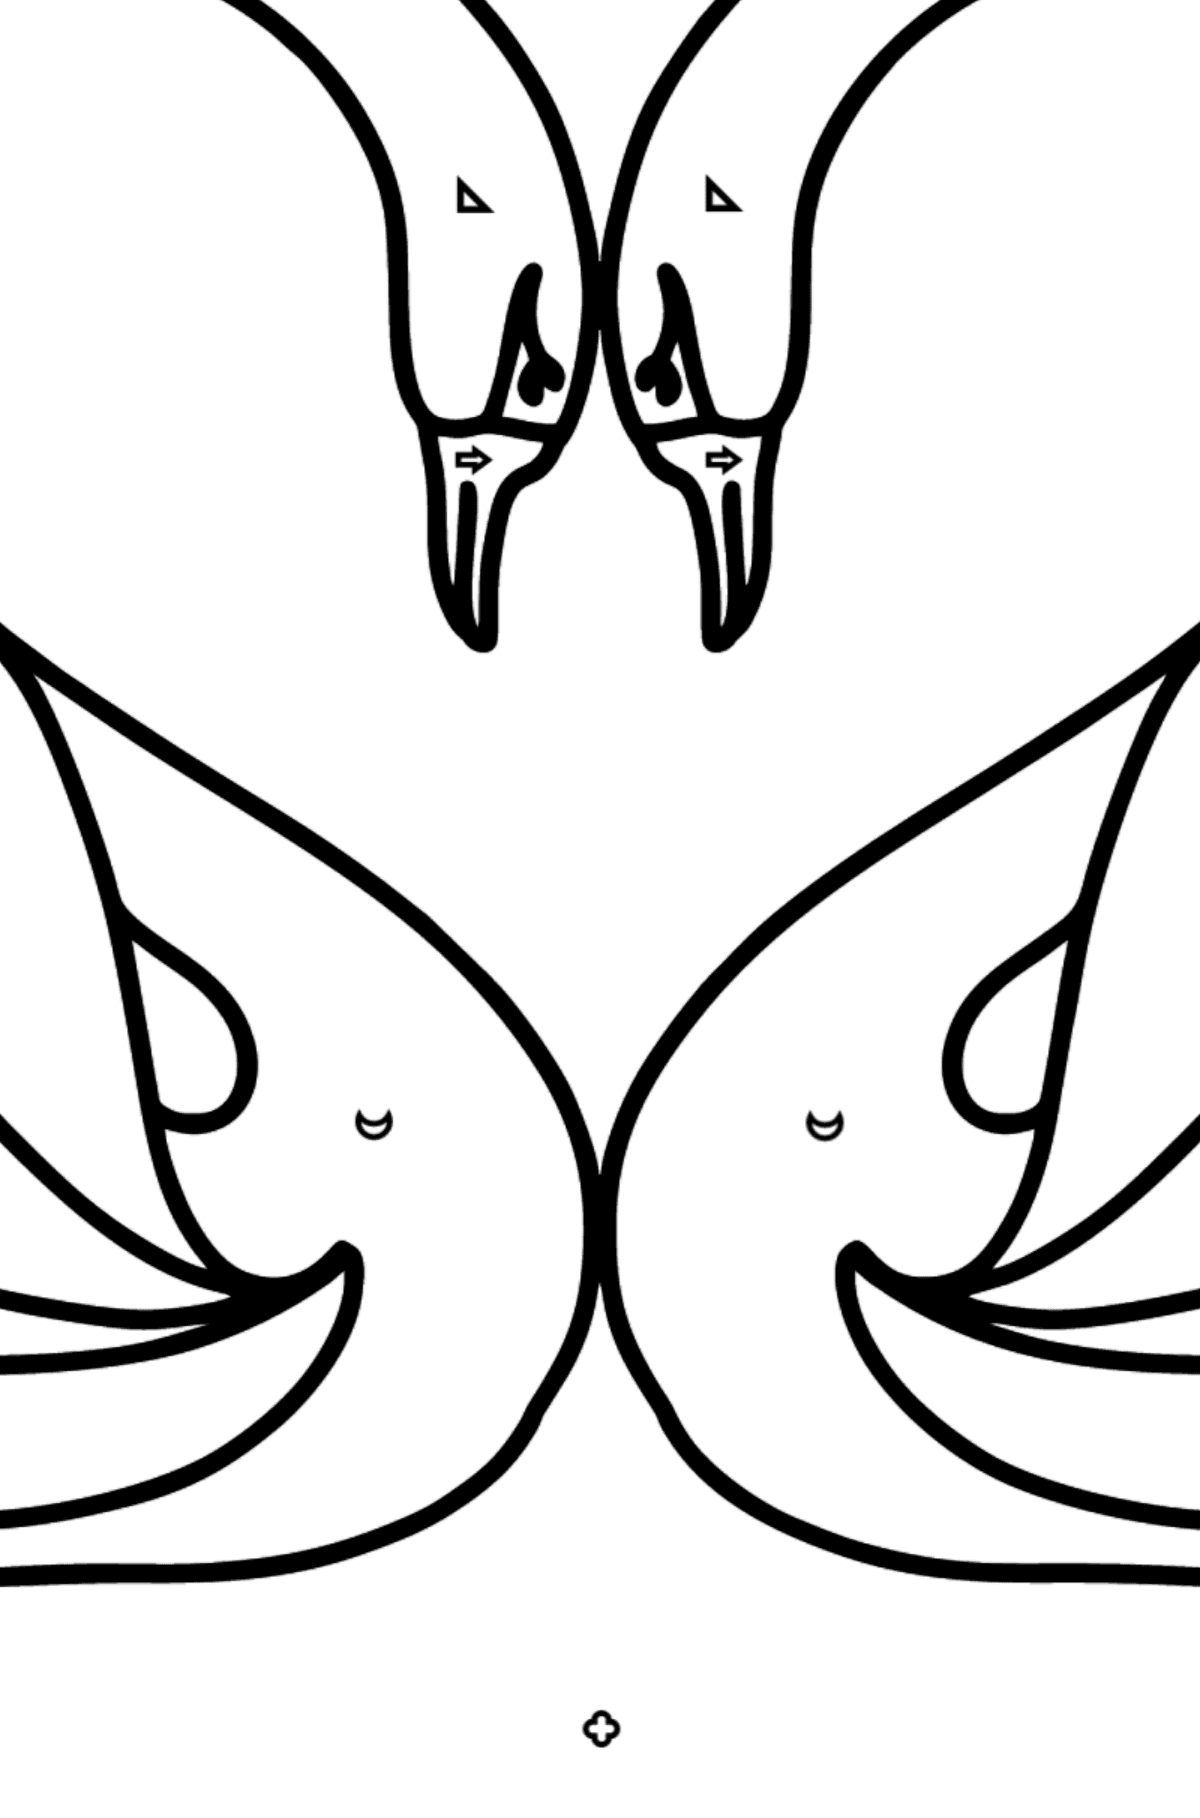 Black Swans coloring page - Coloring by Geometric Shapes for Kids